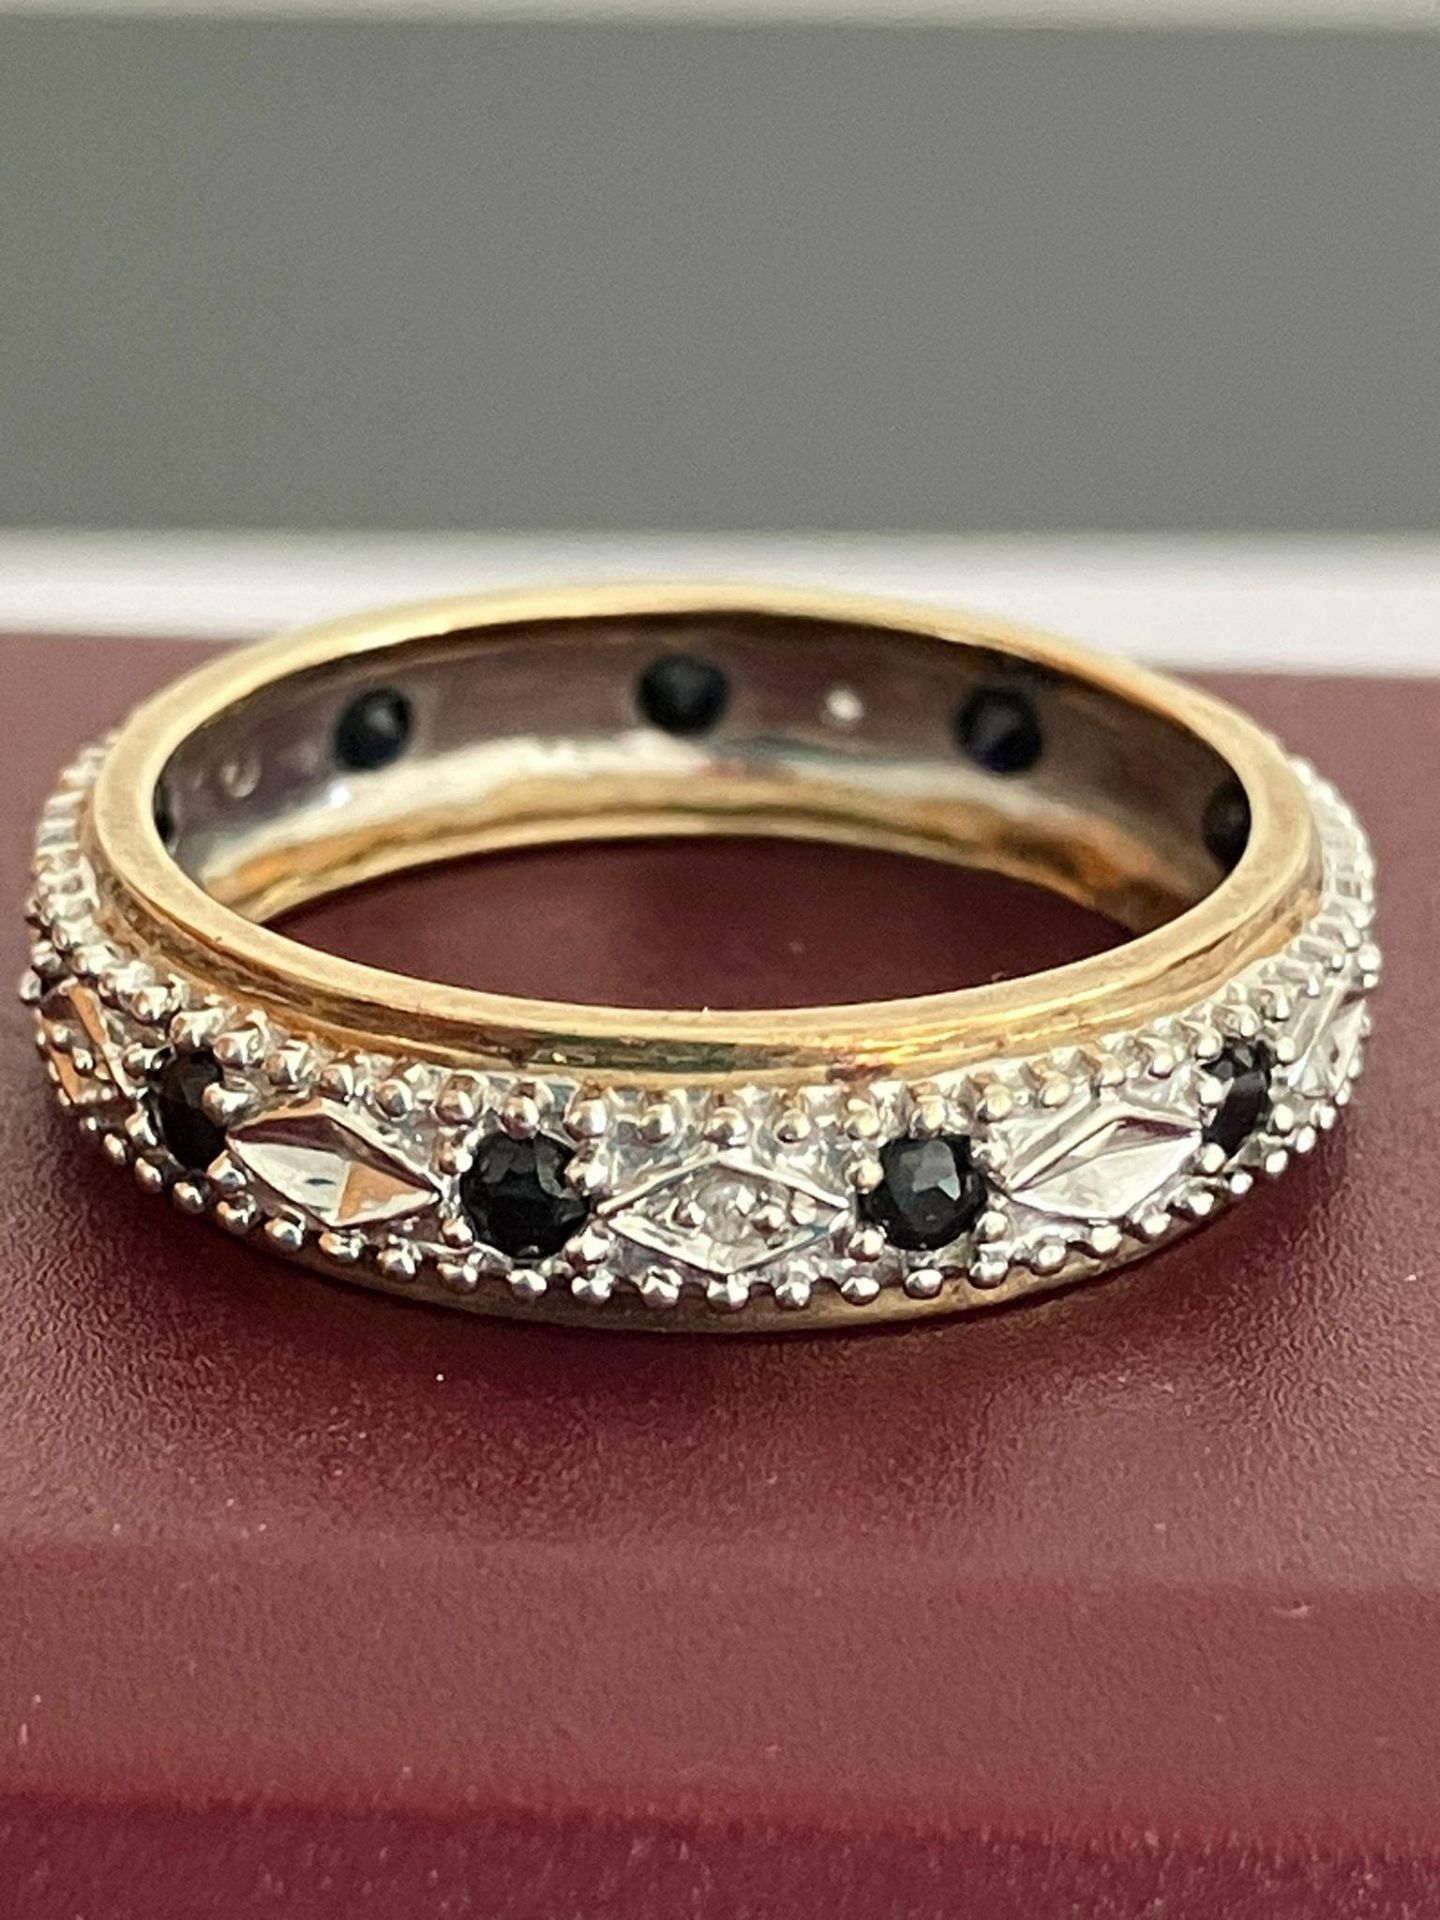 Hallmarked 9 carat WHITE and YELLOW GOLD , DIAMOND and SAPPHIRE ETERNITY RING.2.67 grams. Size P - P